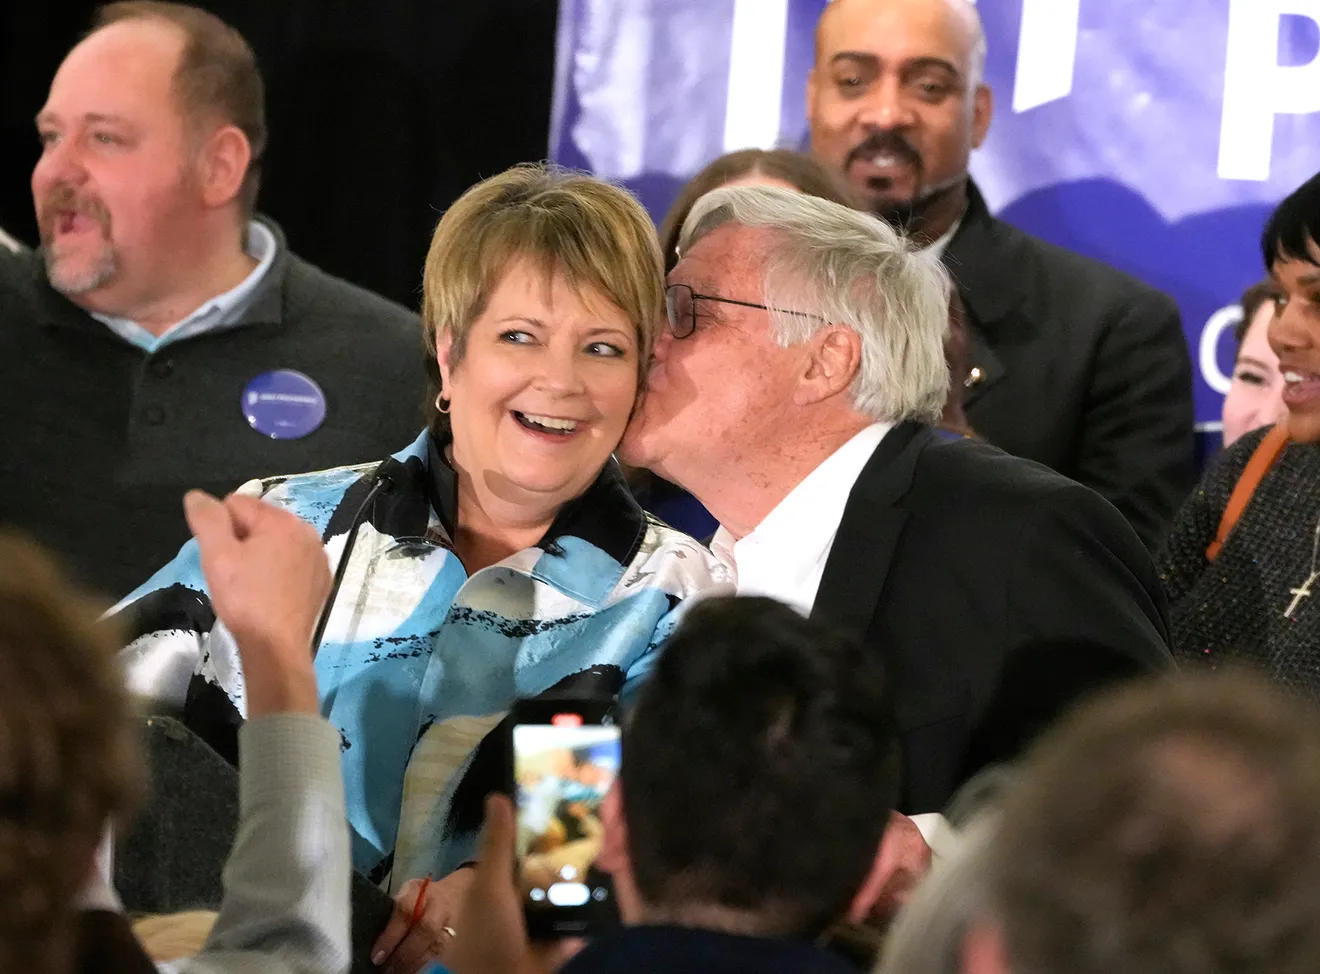 Gregory Sell gives his wife Janet Protasiewicz a kiss during her election night